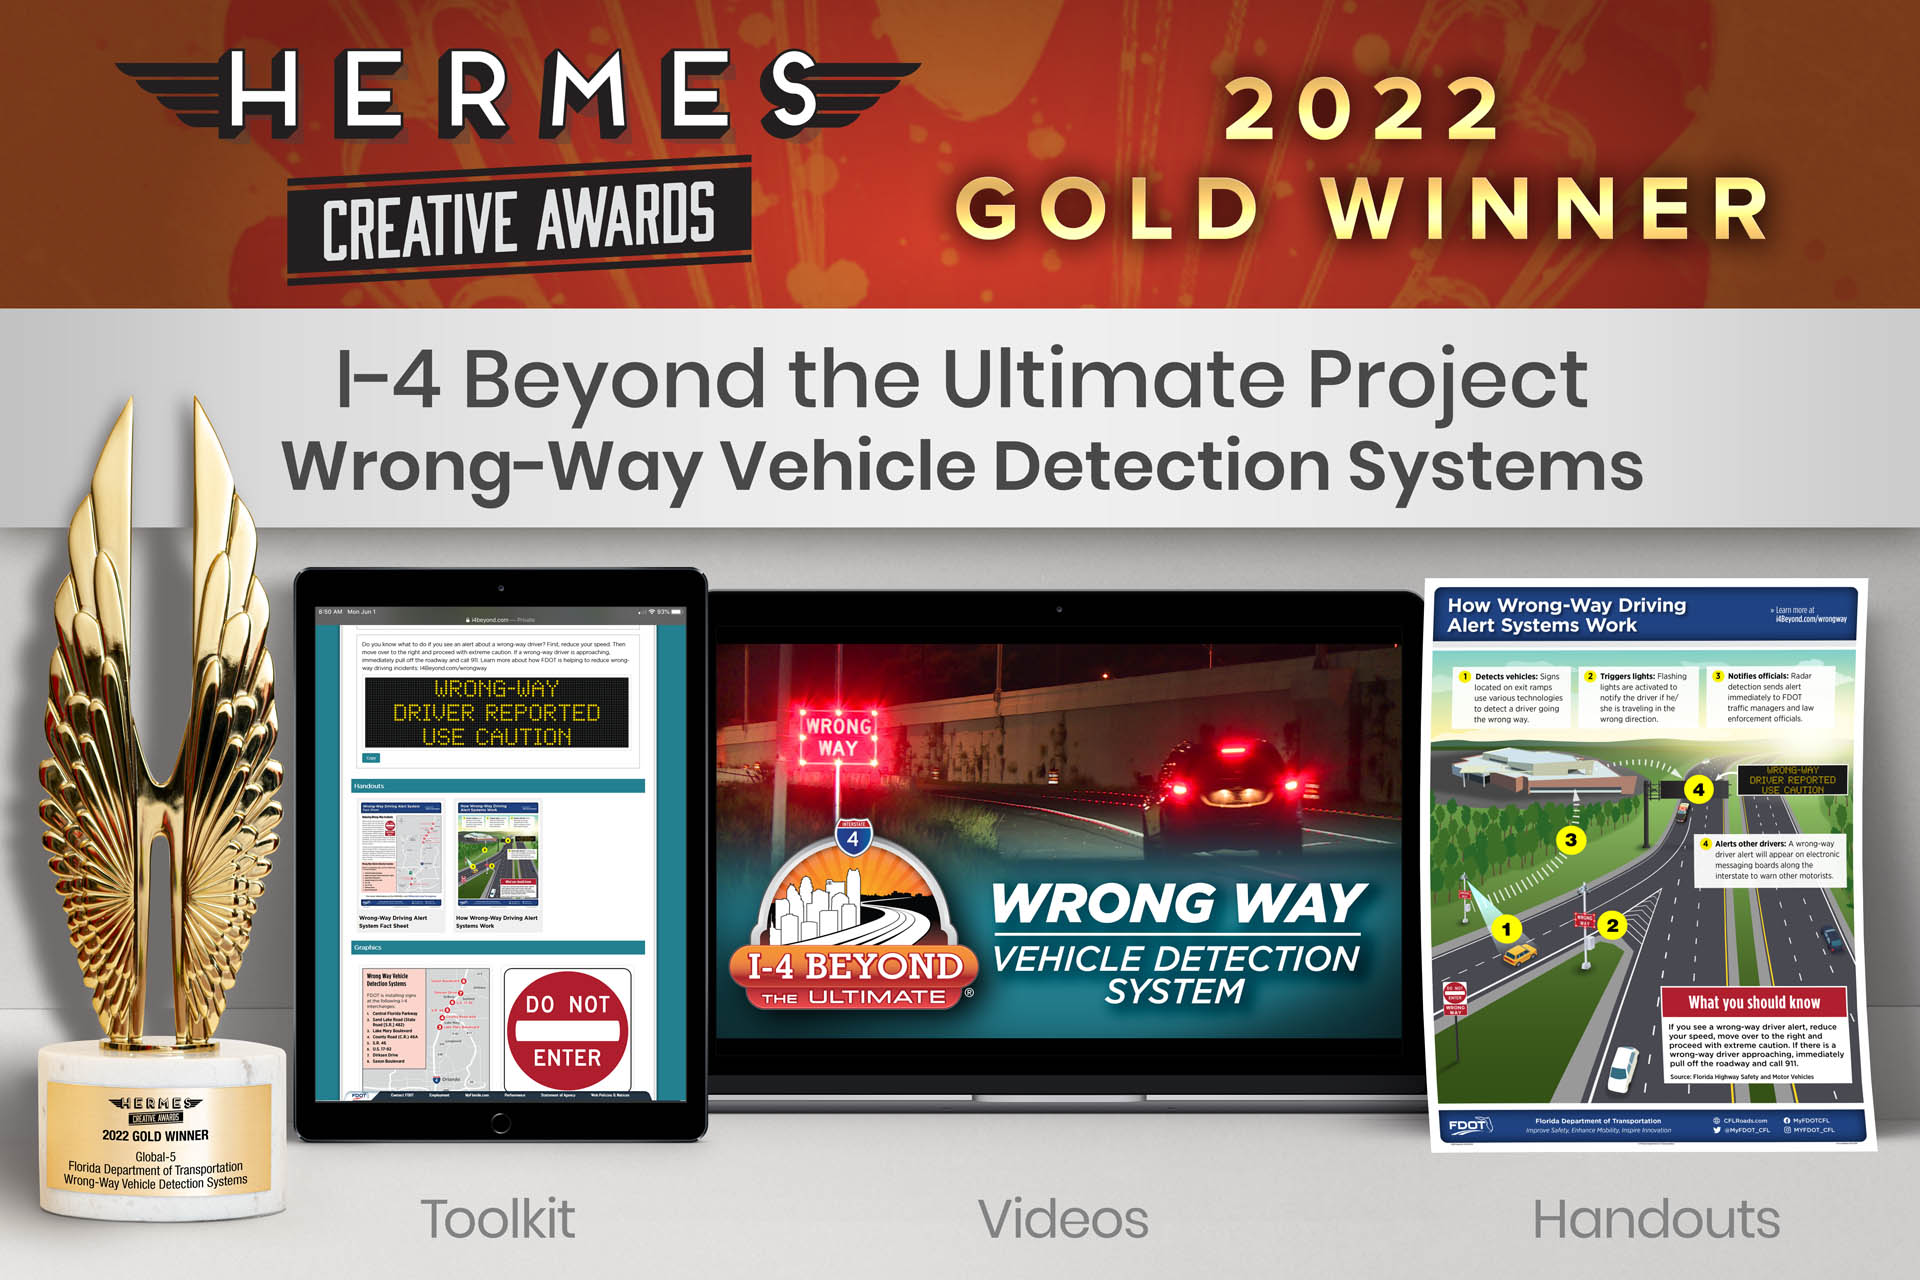 Global-5 Shines in Award-Winning Campaigns